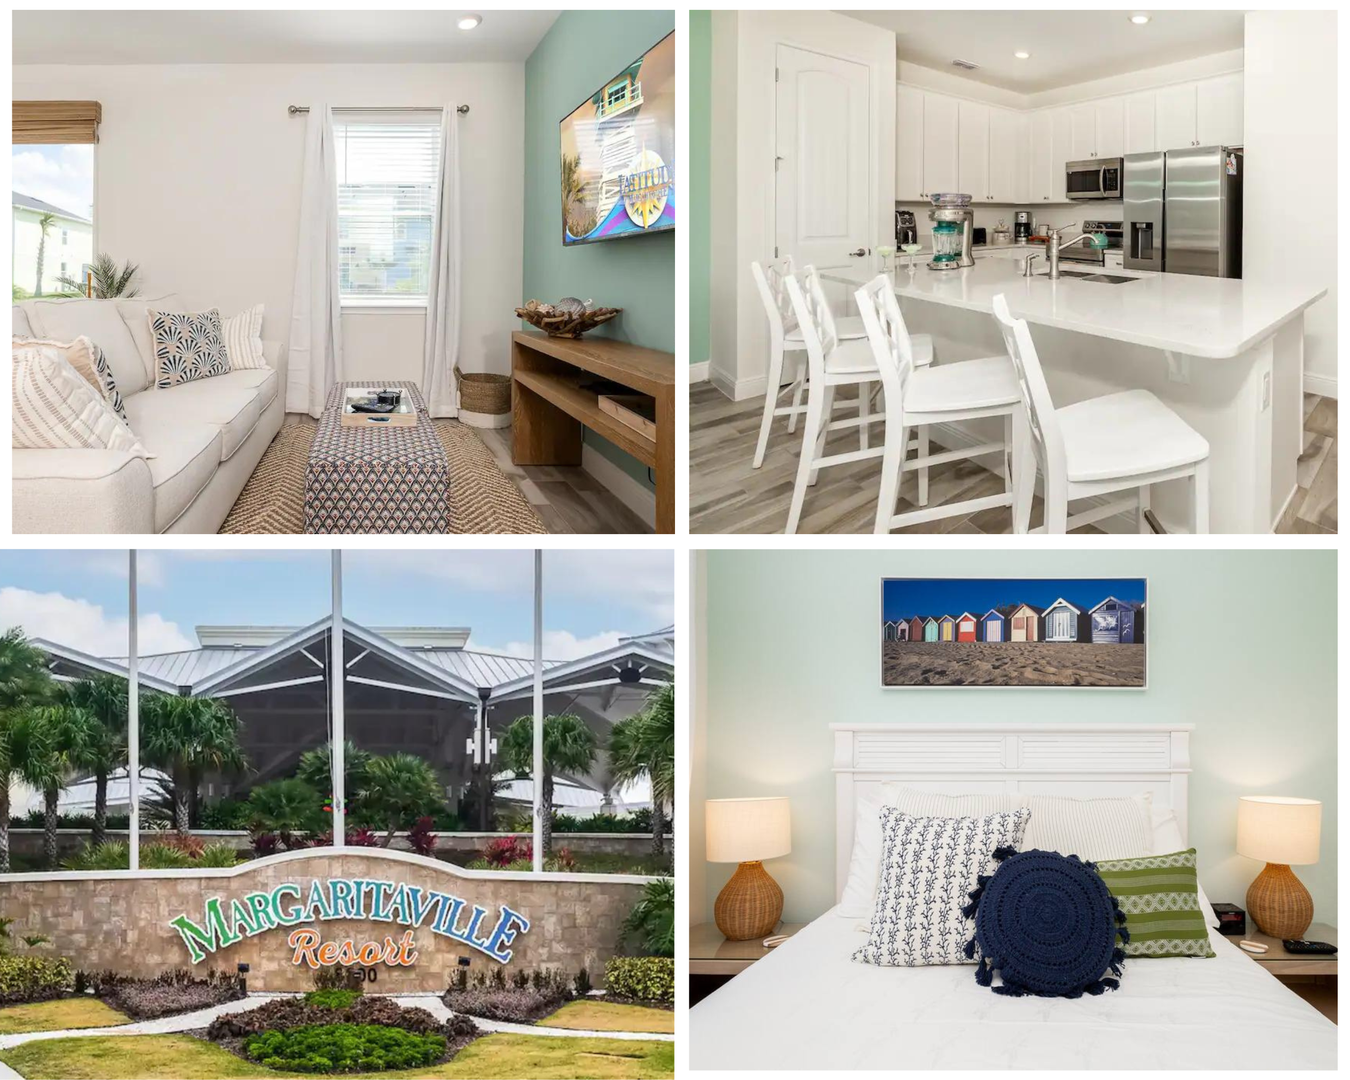 Villa by the Mouse: Margaritaville Oasis